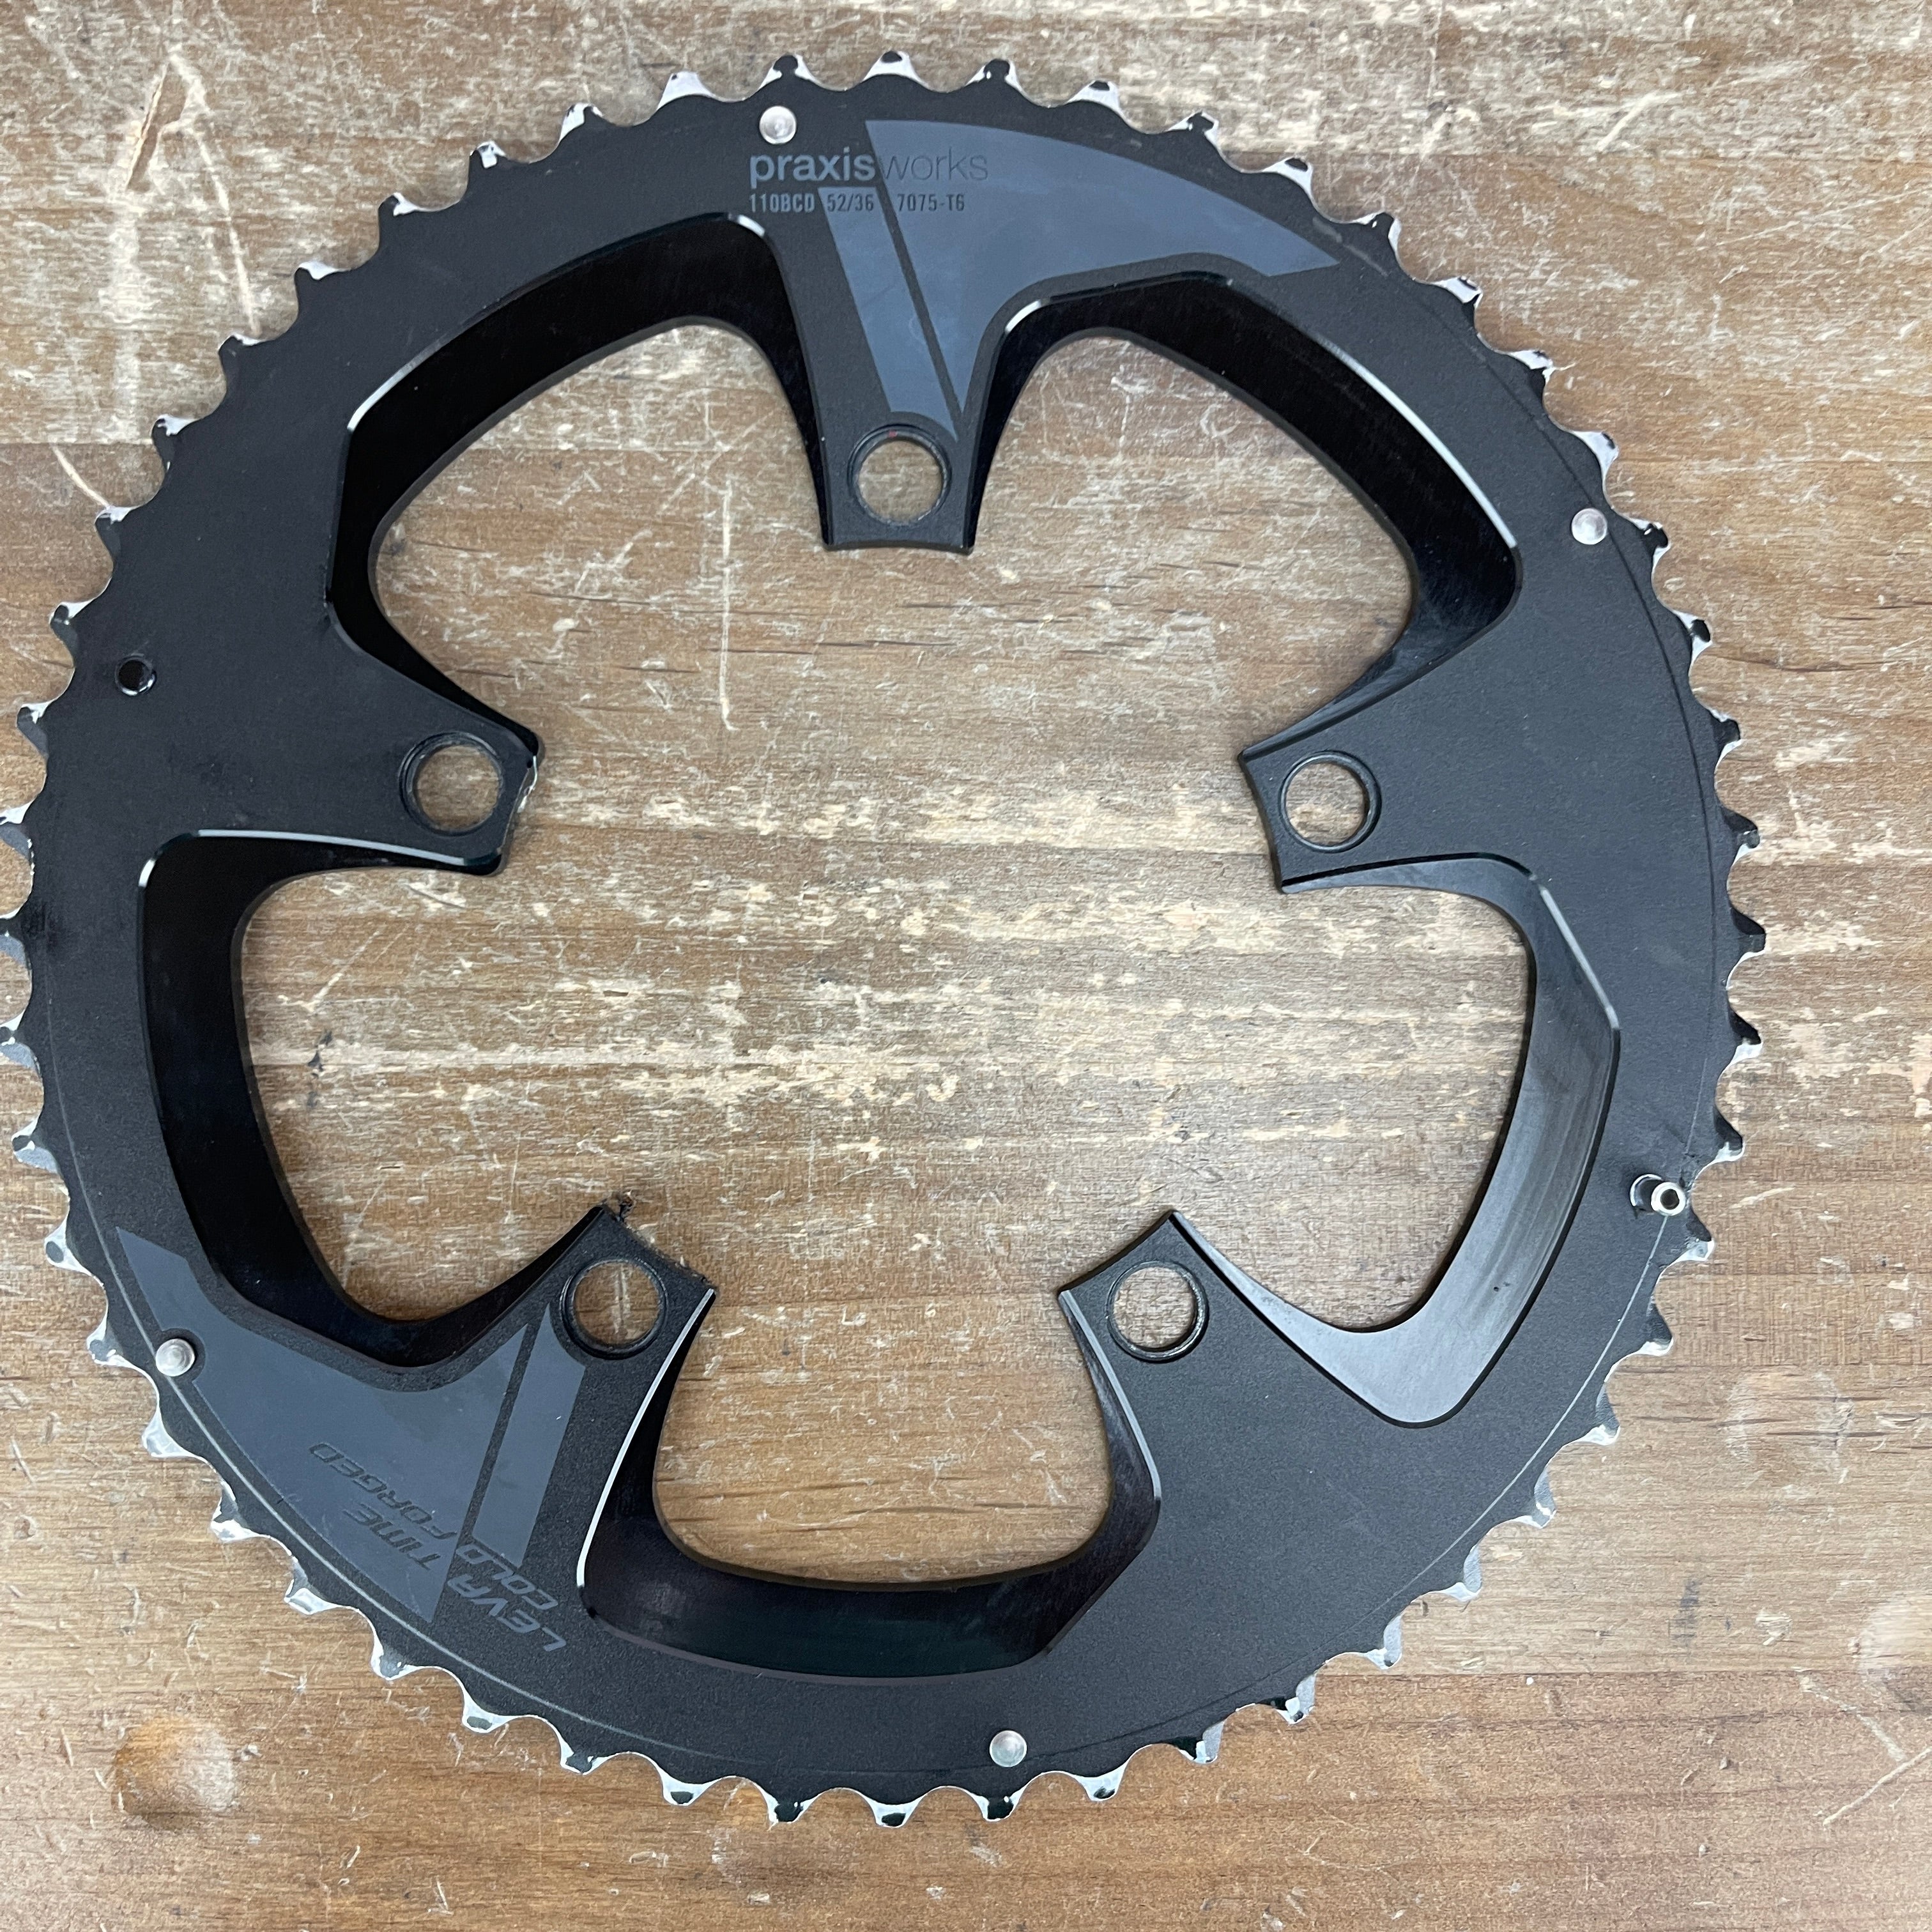 PraxisWorks Buzz Cold Forged 52/36t 110 BCD Road Bike Chainrings 175g –  CyclingUpgrades.com